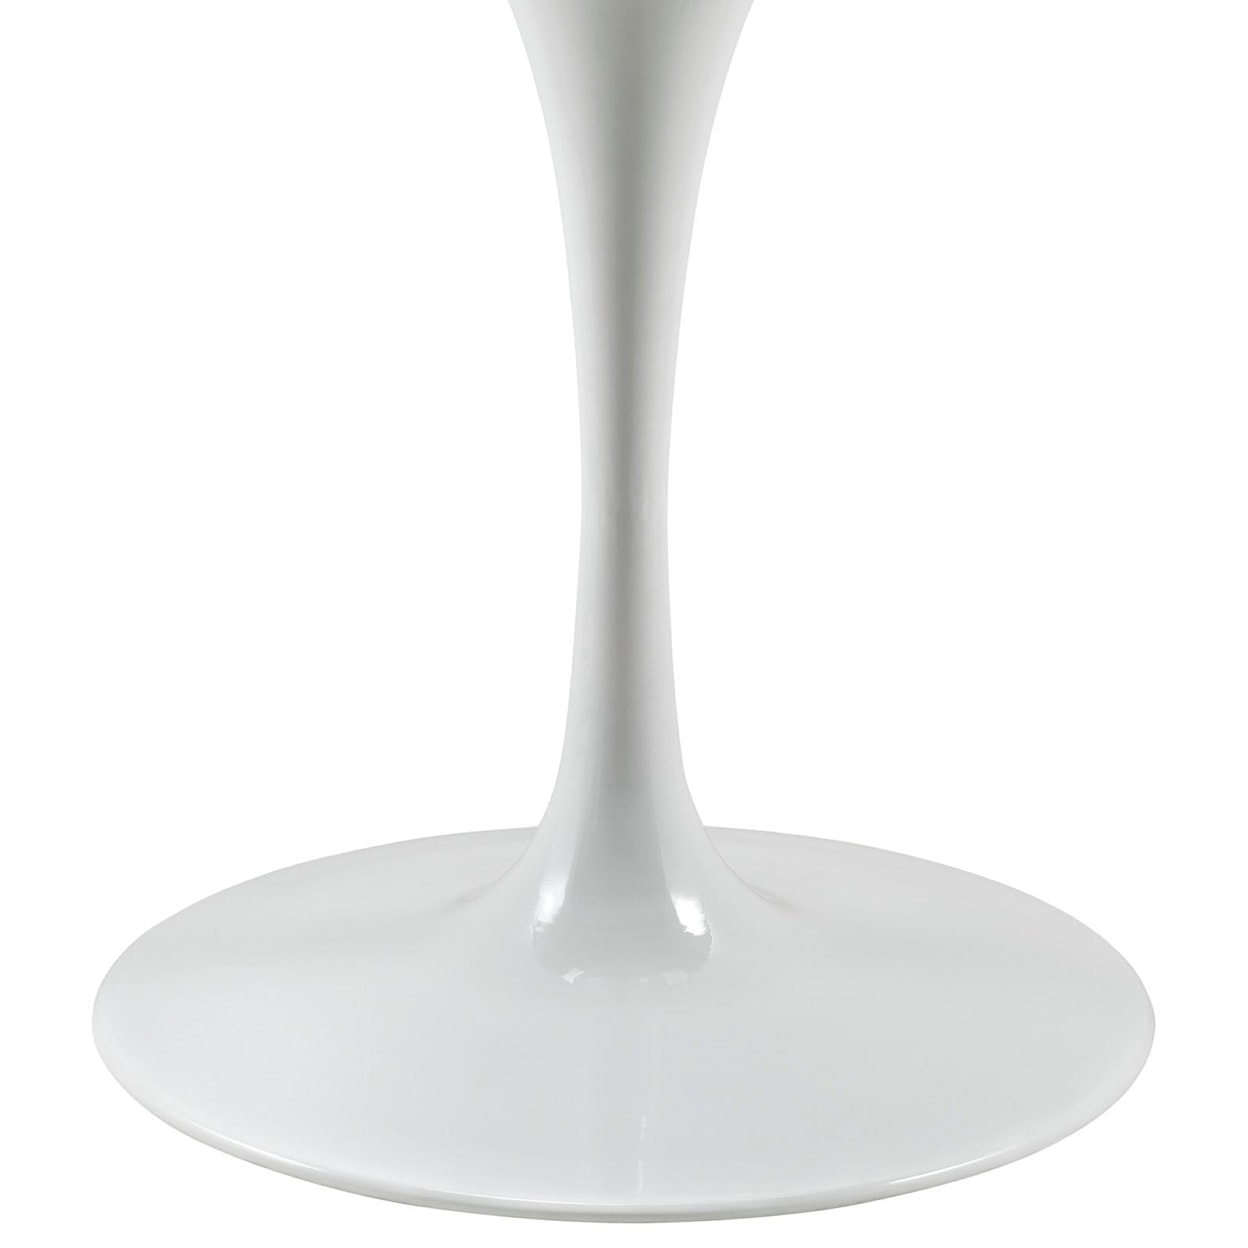 Modway Lippa White 47" Round Dining Table